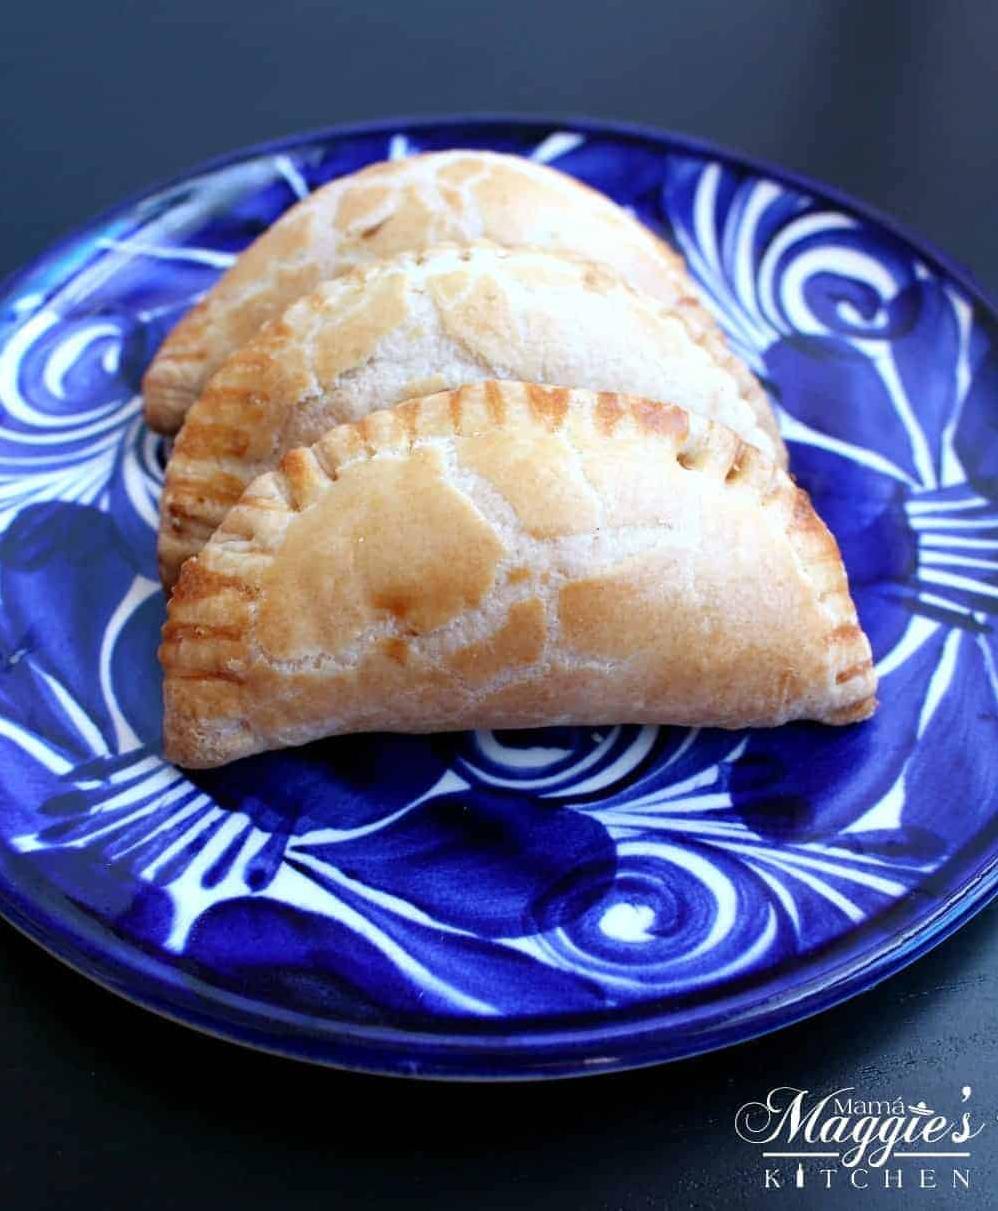  These Empanadas Con Queso are like little pockets of happiness!